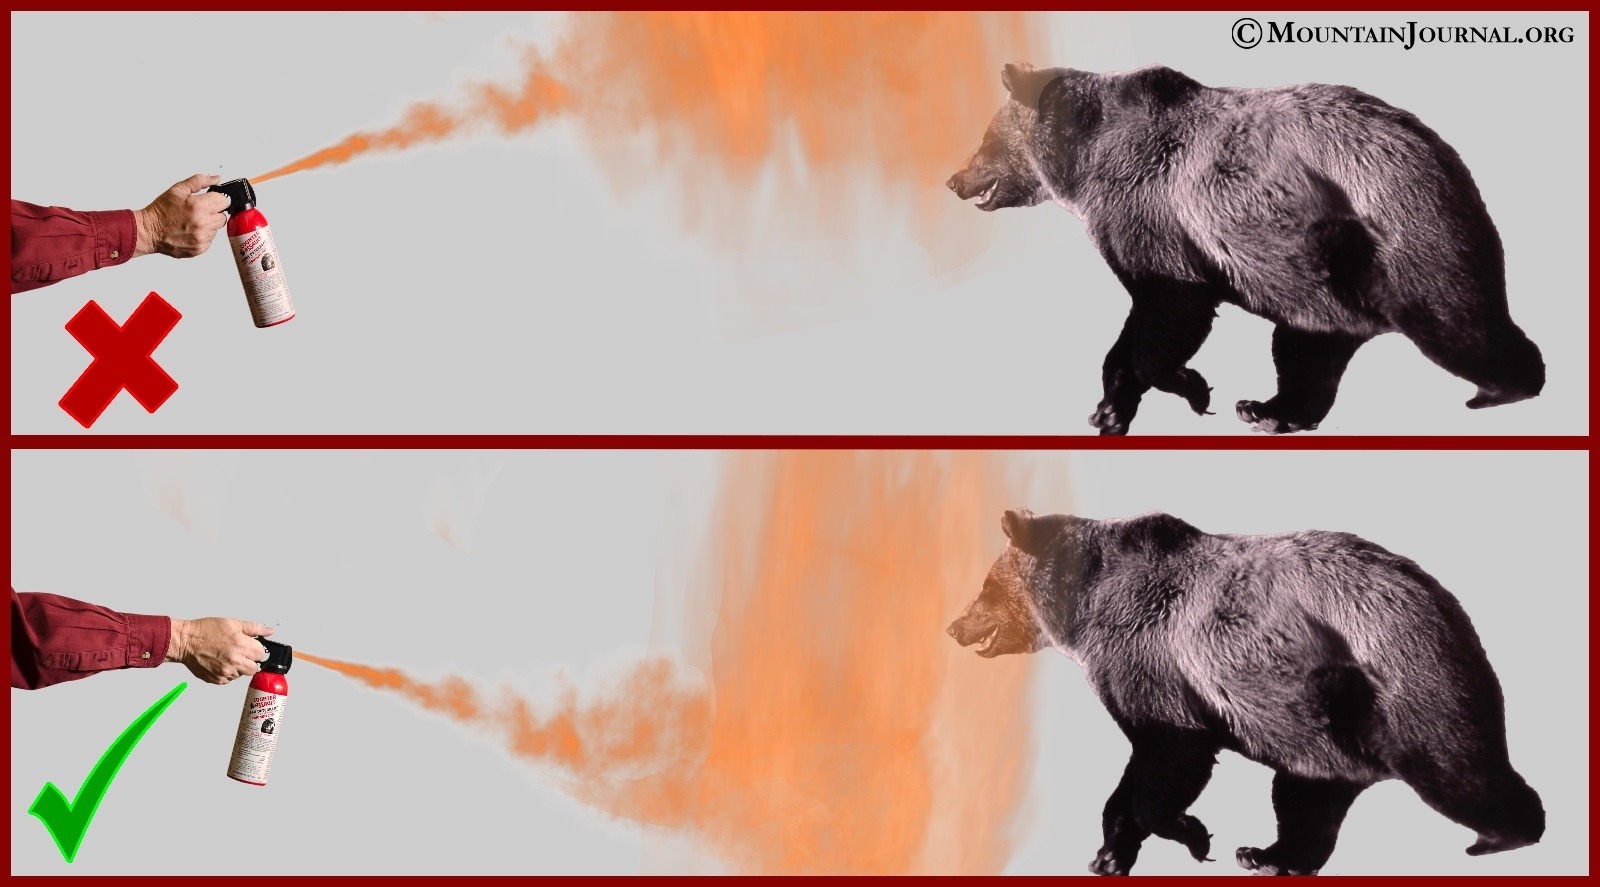 When deploying bear spray in the direction of a charging grizzly, aim lower rather than higher, experts like Chuck Bartlebaugh say. Tilt the can downward in the direction of the bear so that the ingredients atomize in the air and rise, creating a wall (rather than spraying over the top of the bear).  Do it sooner rather than wait until a bear is mere feet away.  And make sure you have a good grip on the can.  Hold with two hands if necessary.